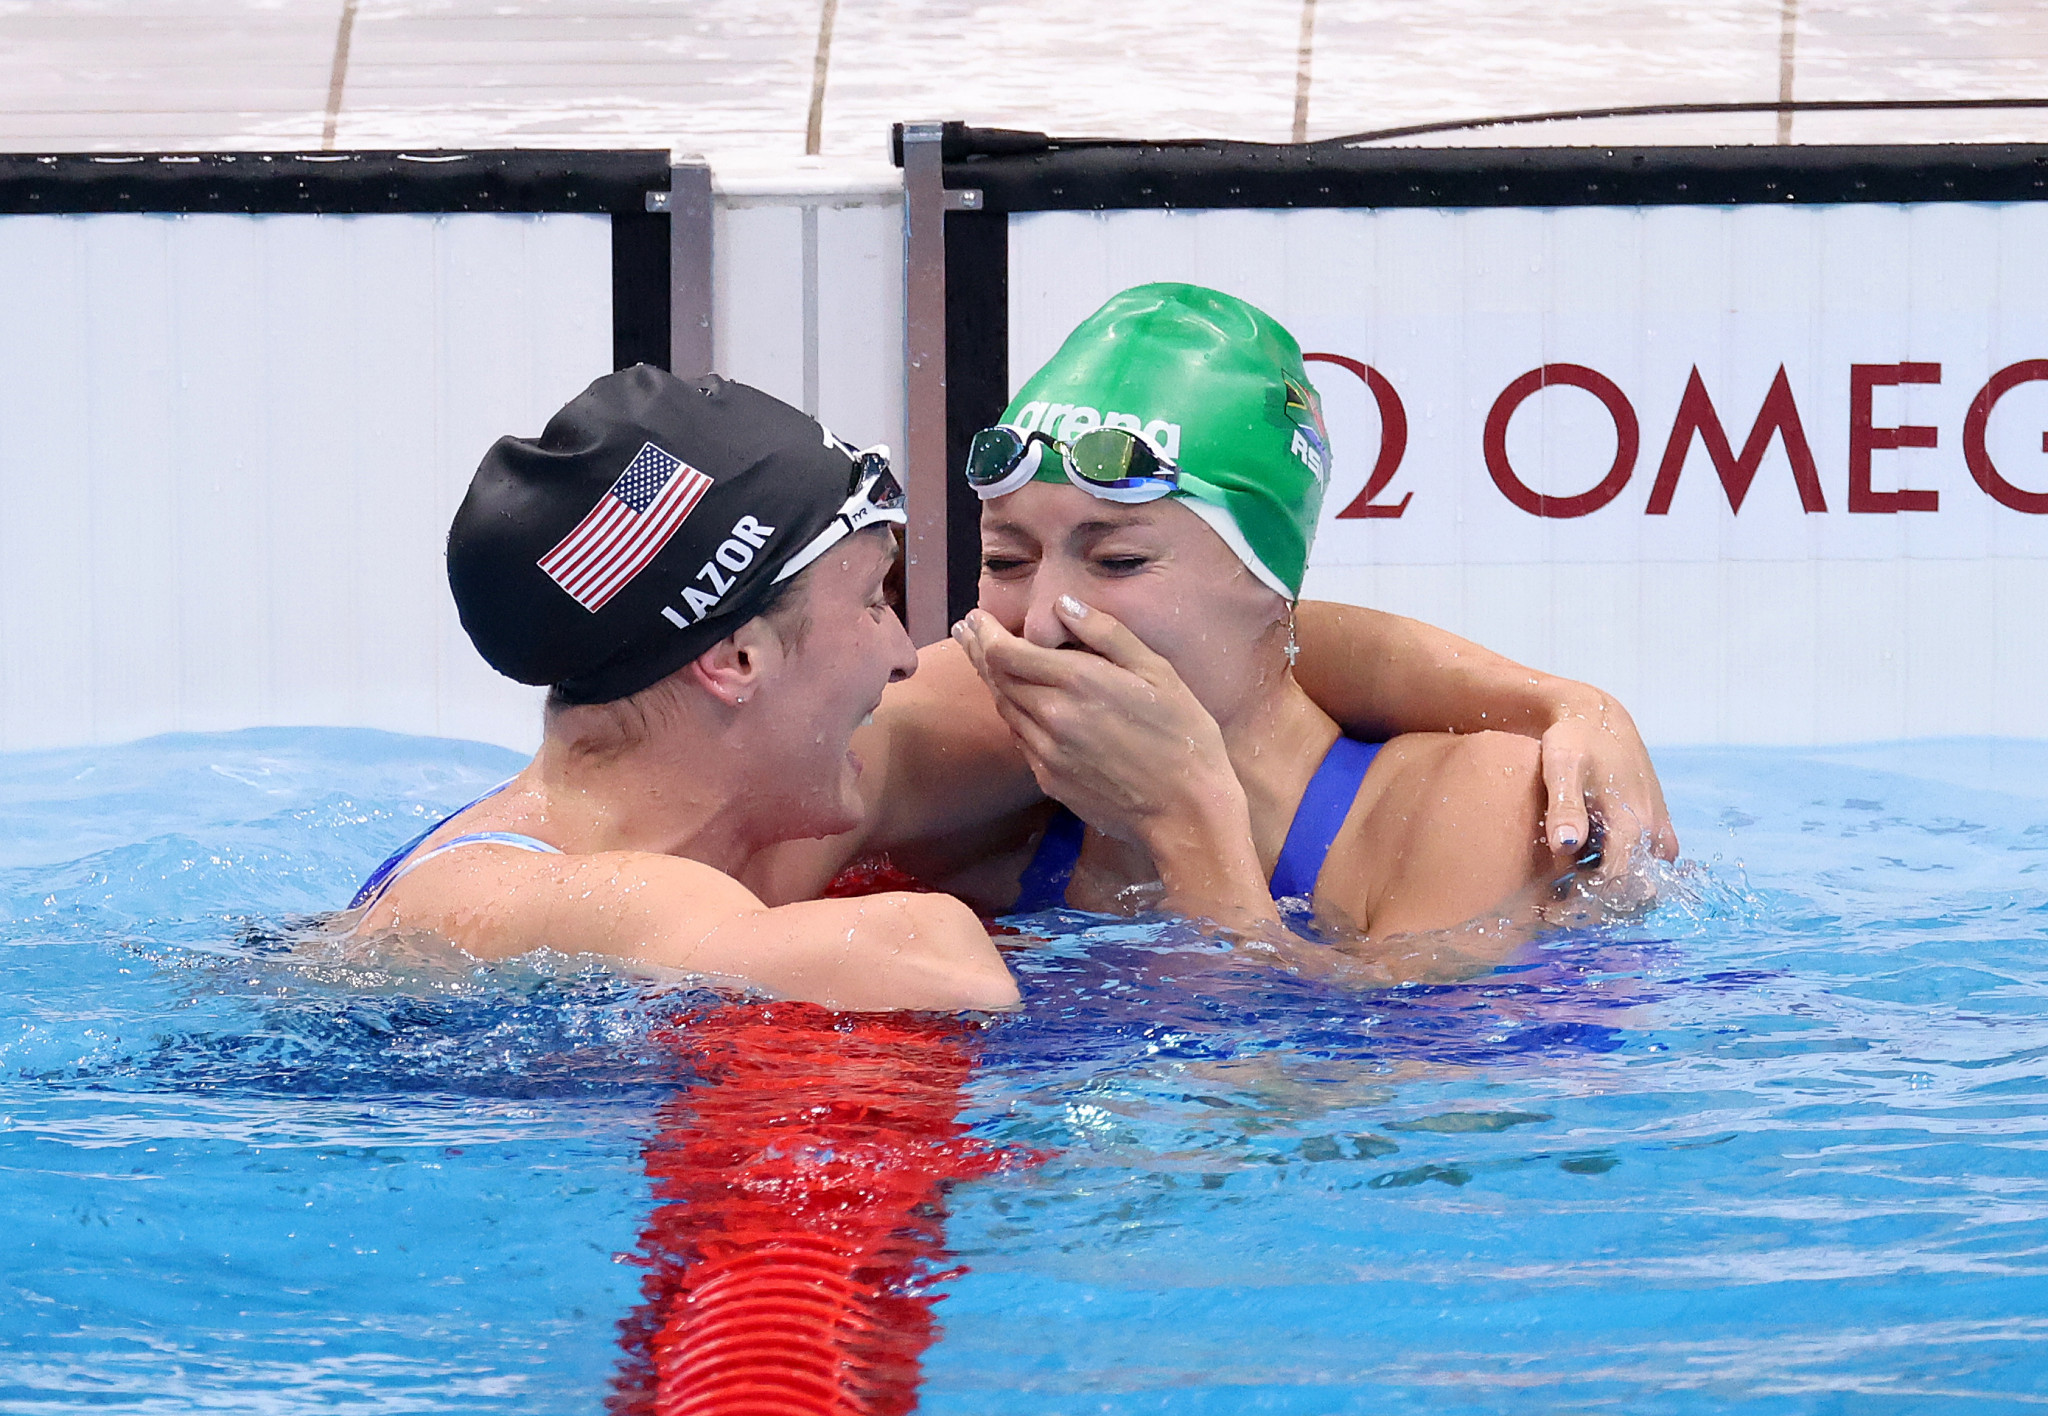 South Africa's Tatjana Schoenmaker was overcome after winning the women's 200m breaststroke Olympic title in a world record time at Tokyo 2020 ©Getty Images